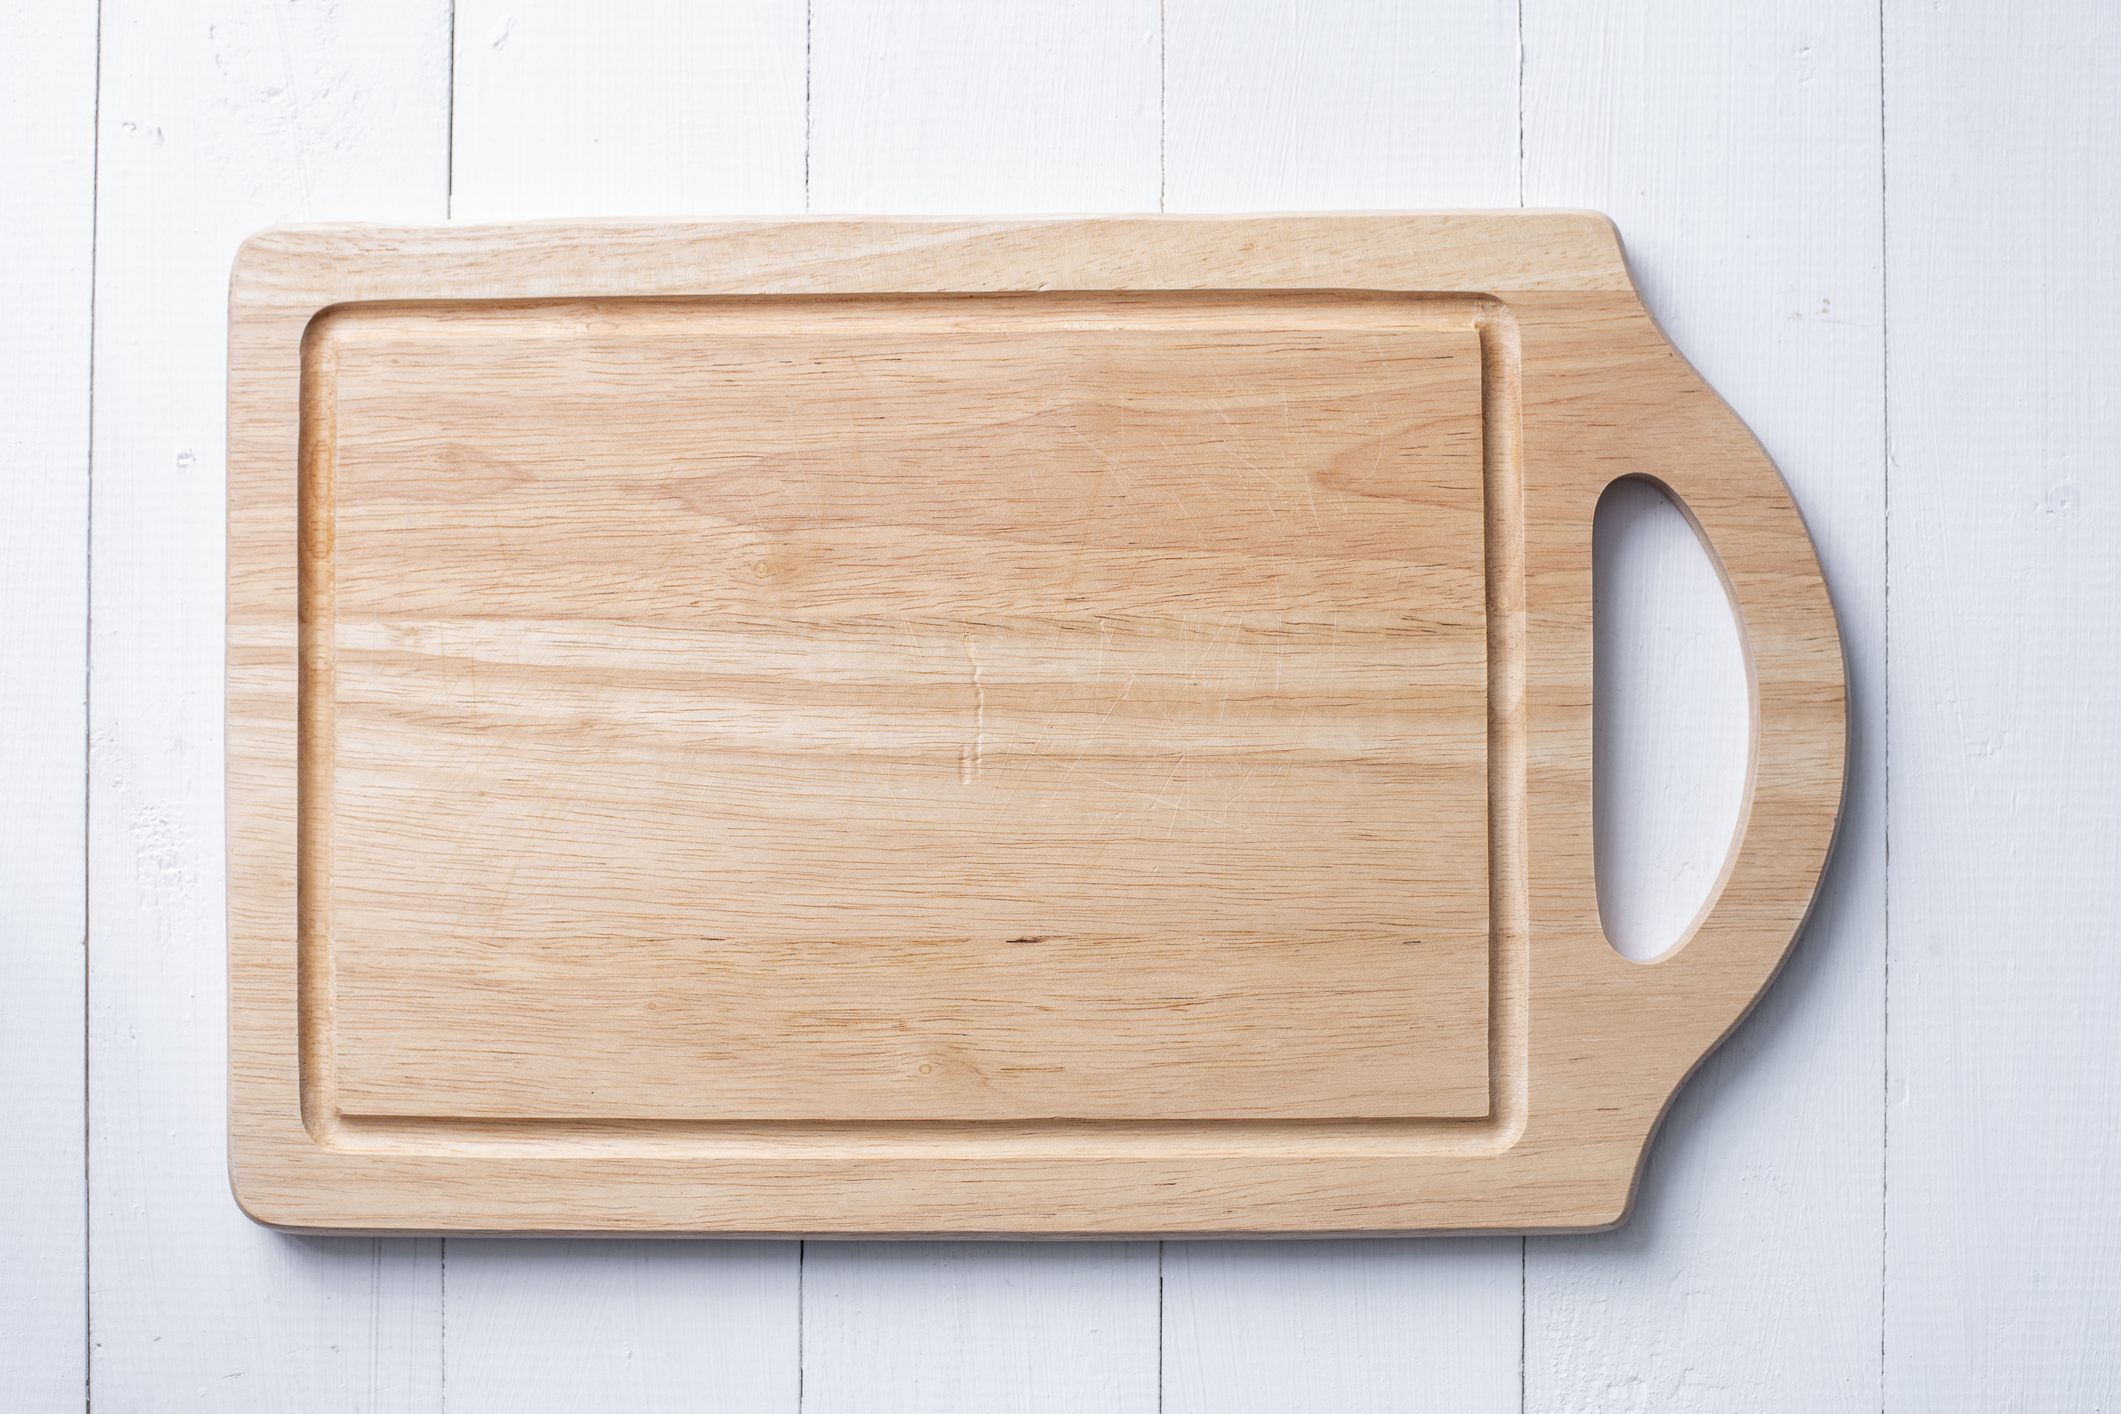 How to Clean a Wooden Cutting Board - and Whether It's Safe to Chop Raw  Meat on Them